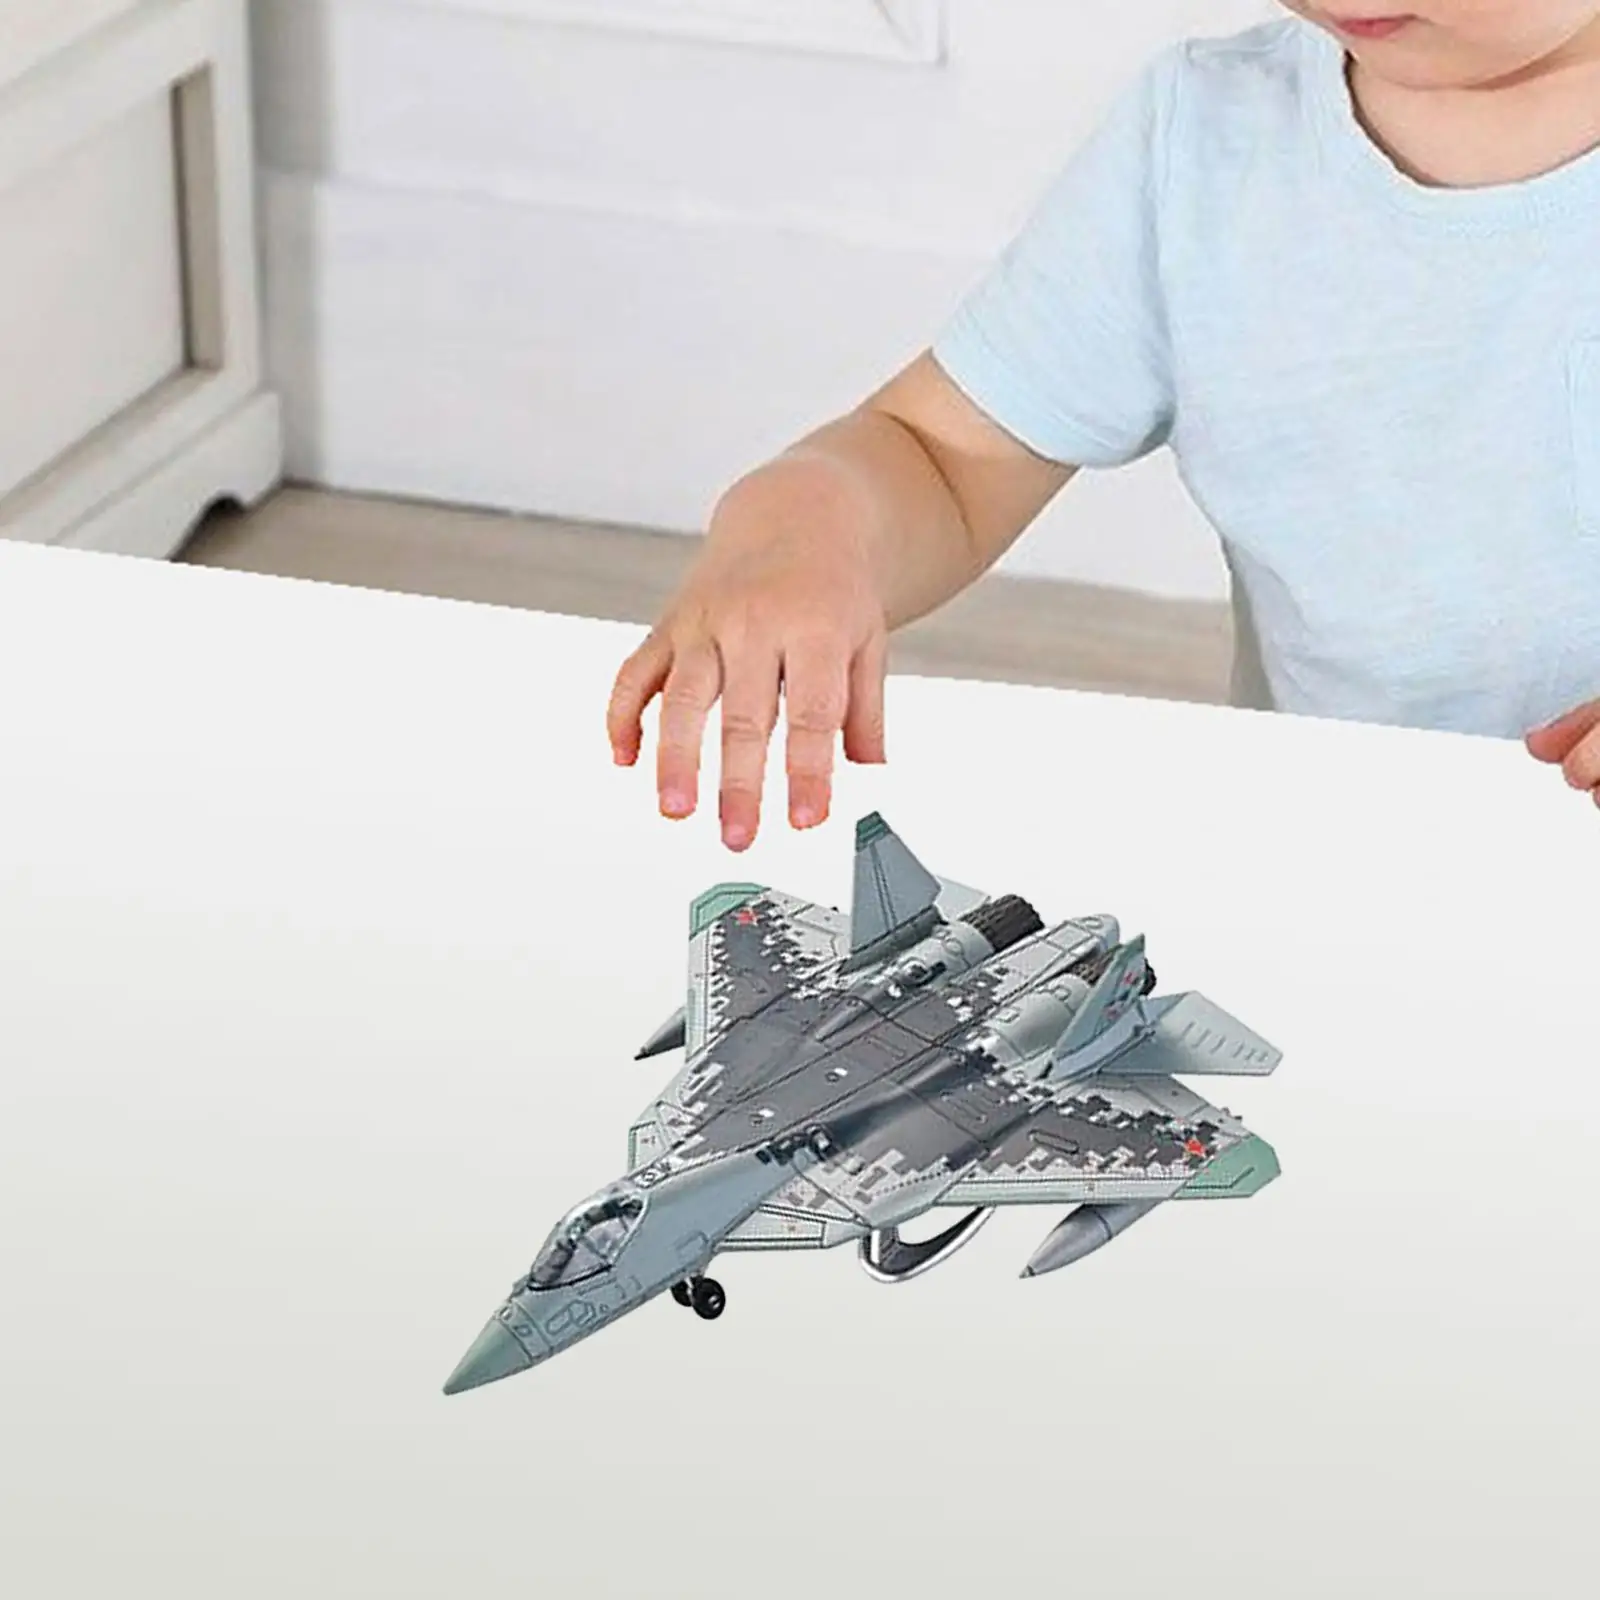 1:72 Fighter Jet Model Kits DIY Assemble Simulation Miniature Airplane Building Kits 3D Puzzle for Adults Kids Girls Gifts